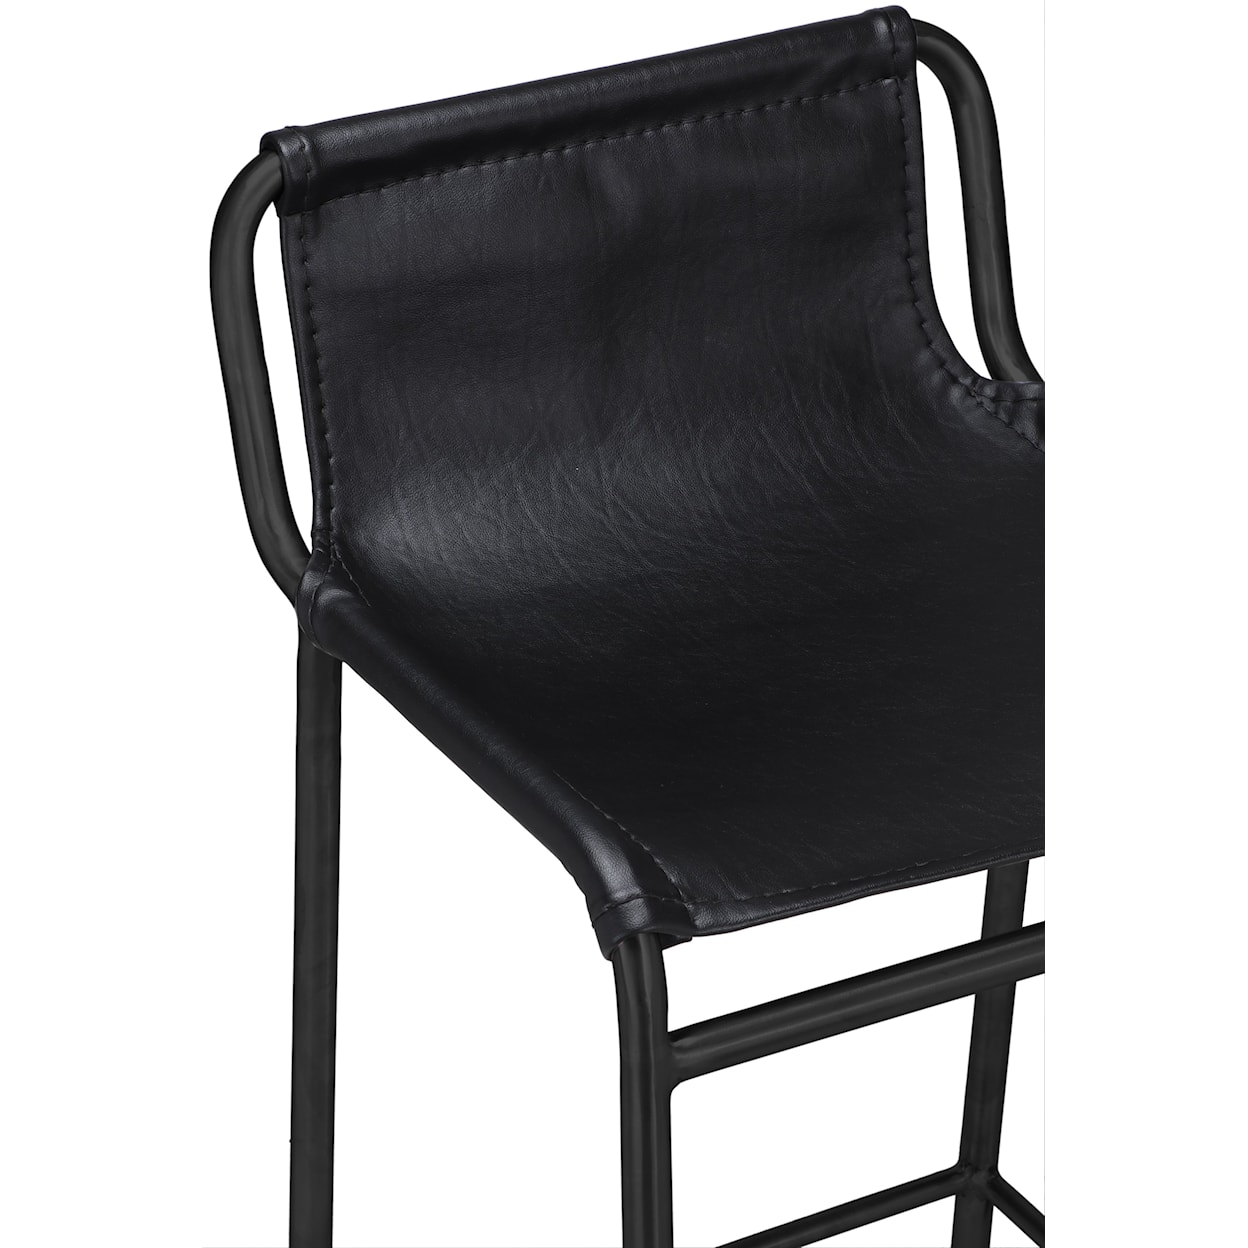 Meridian Furniture Dax Black Faux Leather Counter Stool